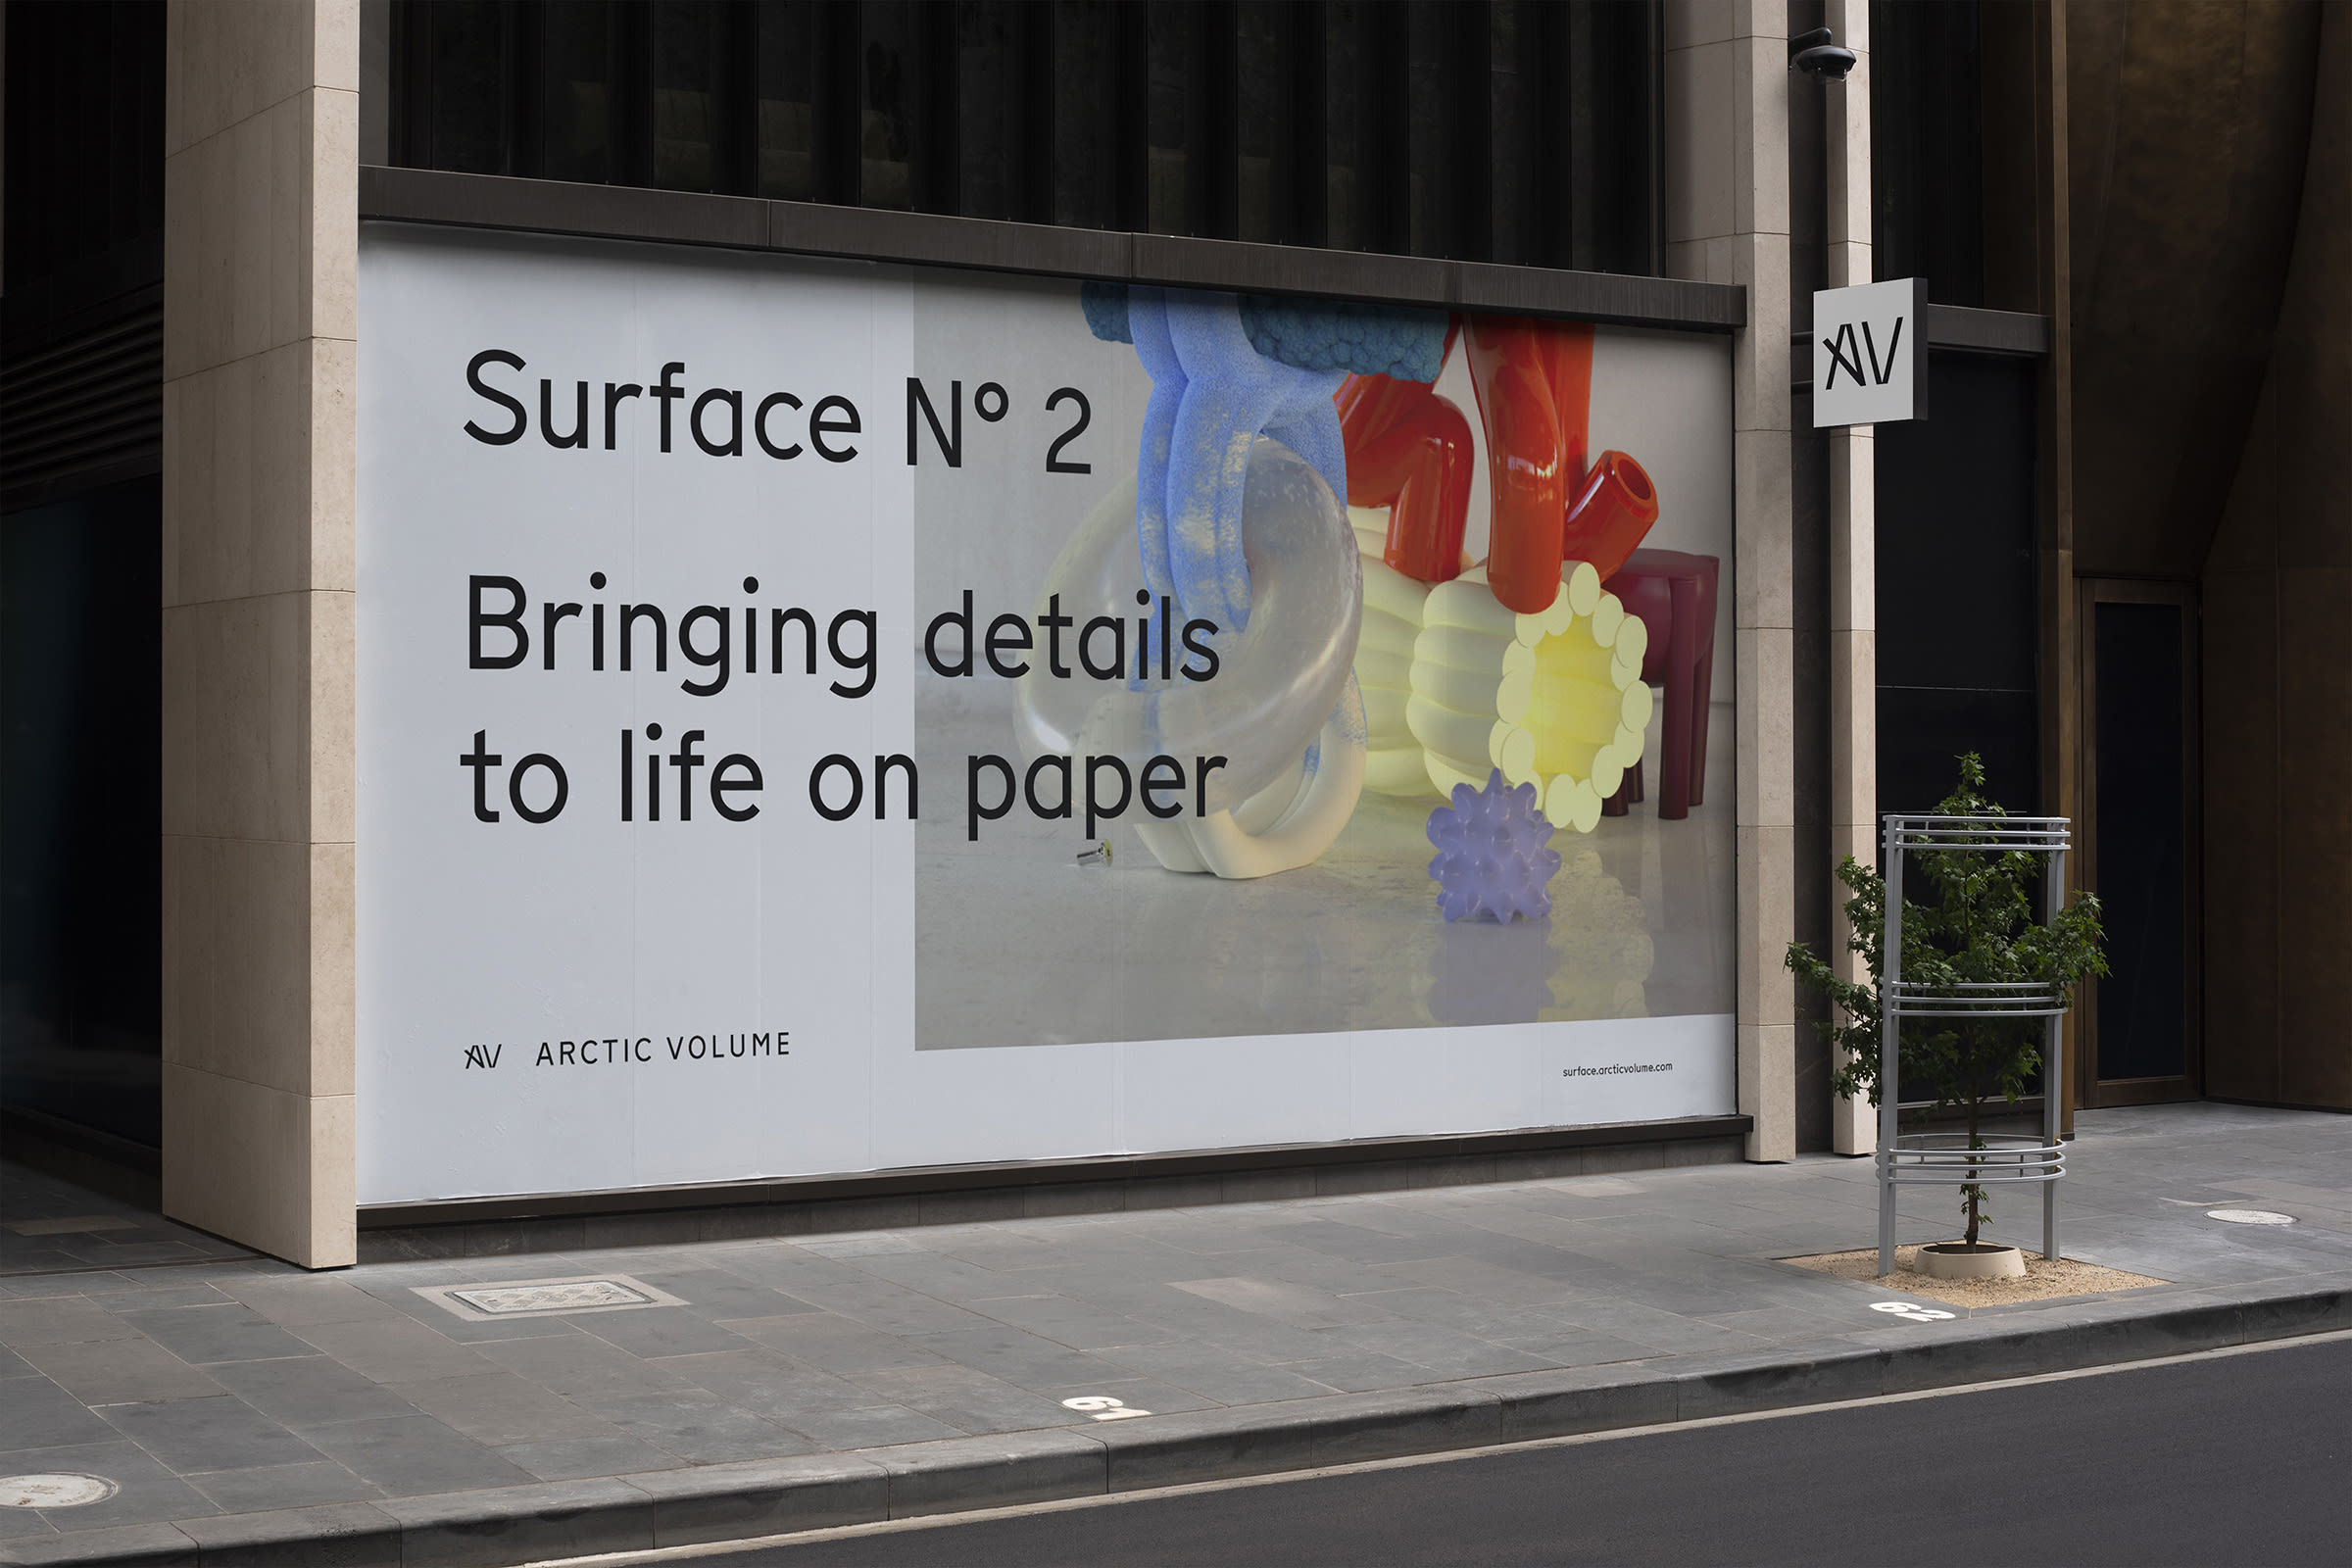 Billboard mockup with Surface N°2 poster